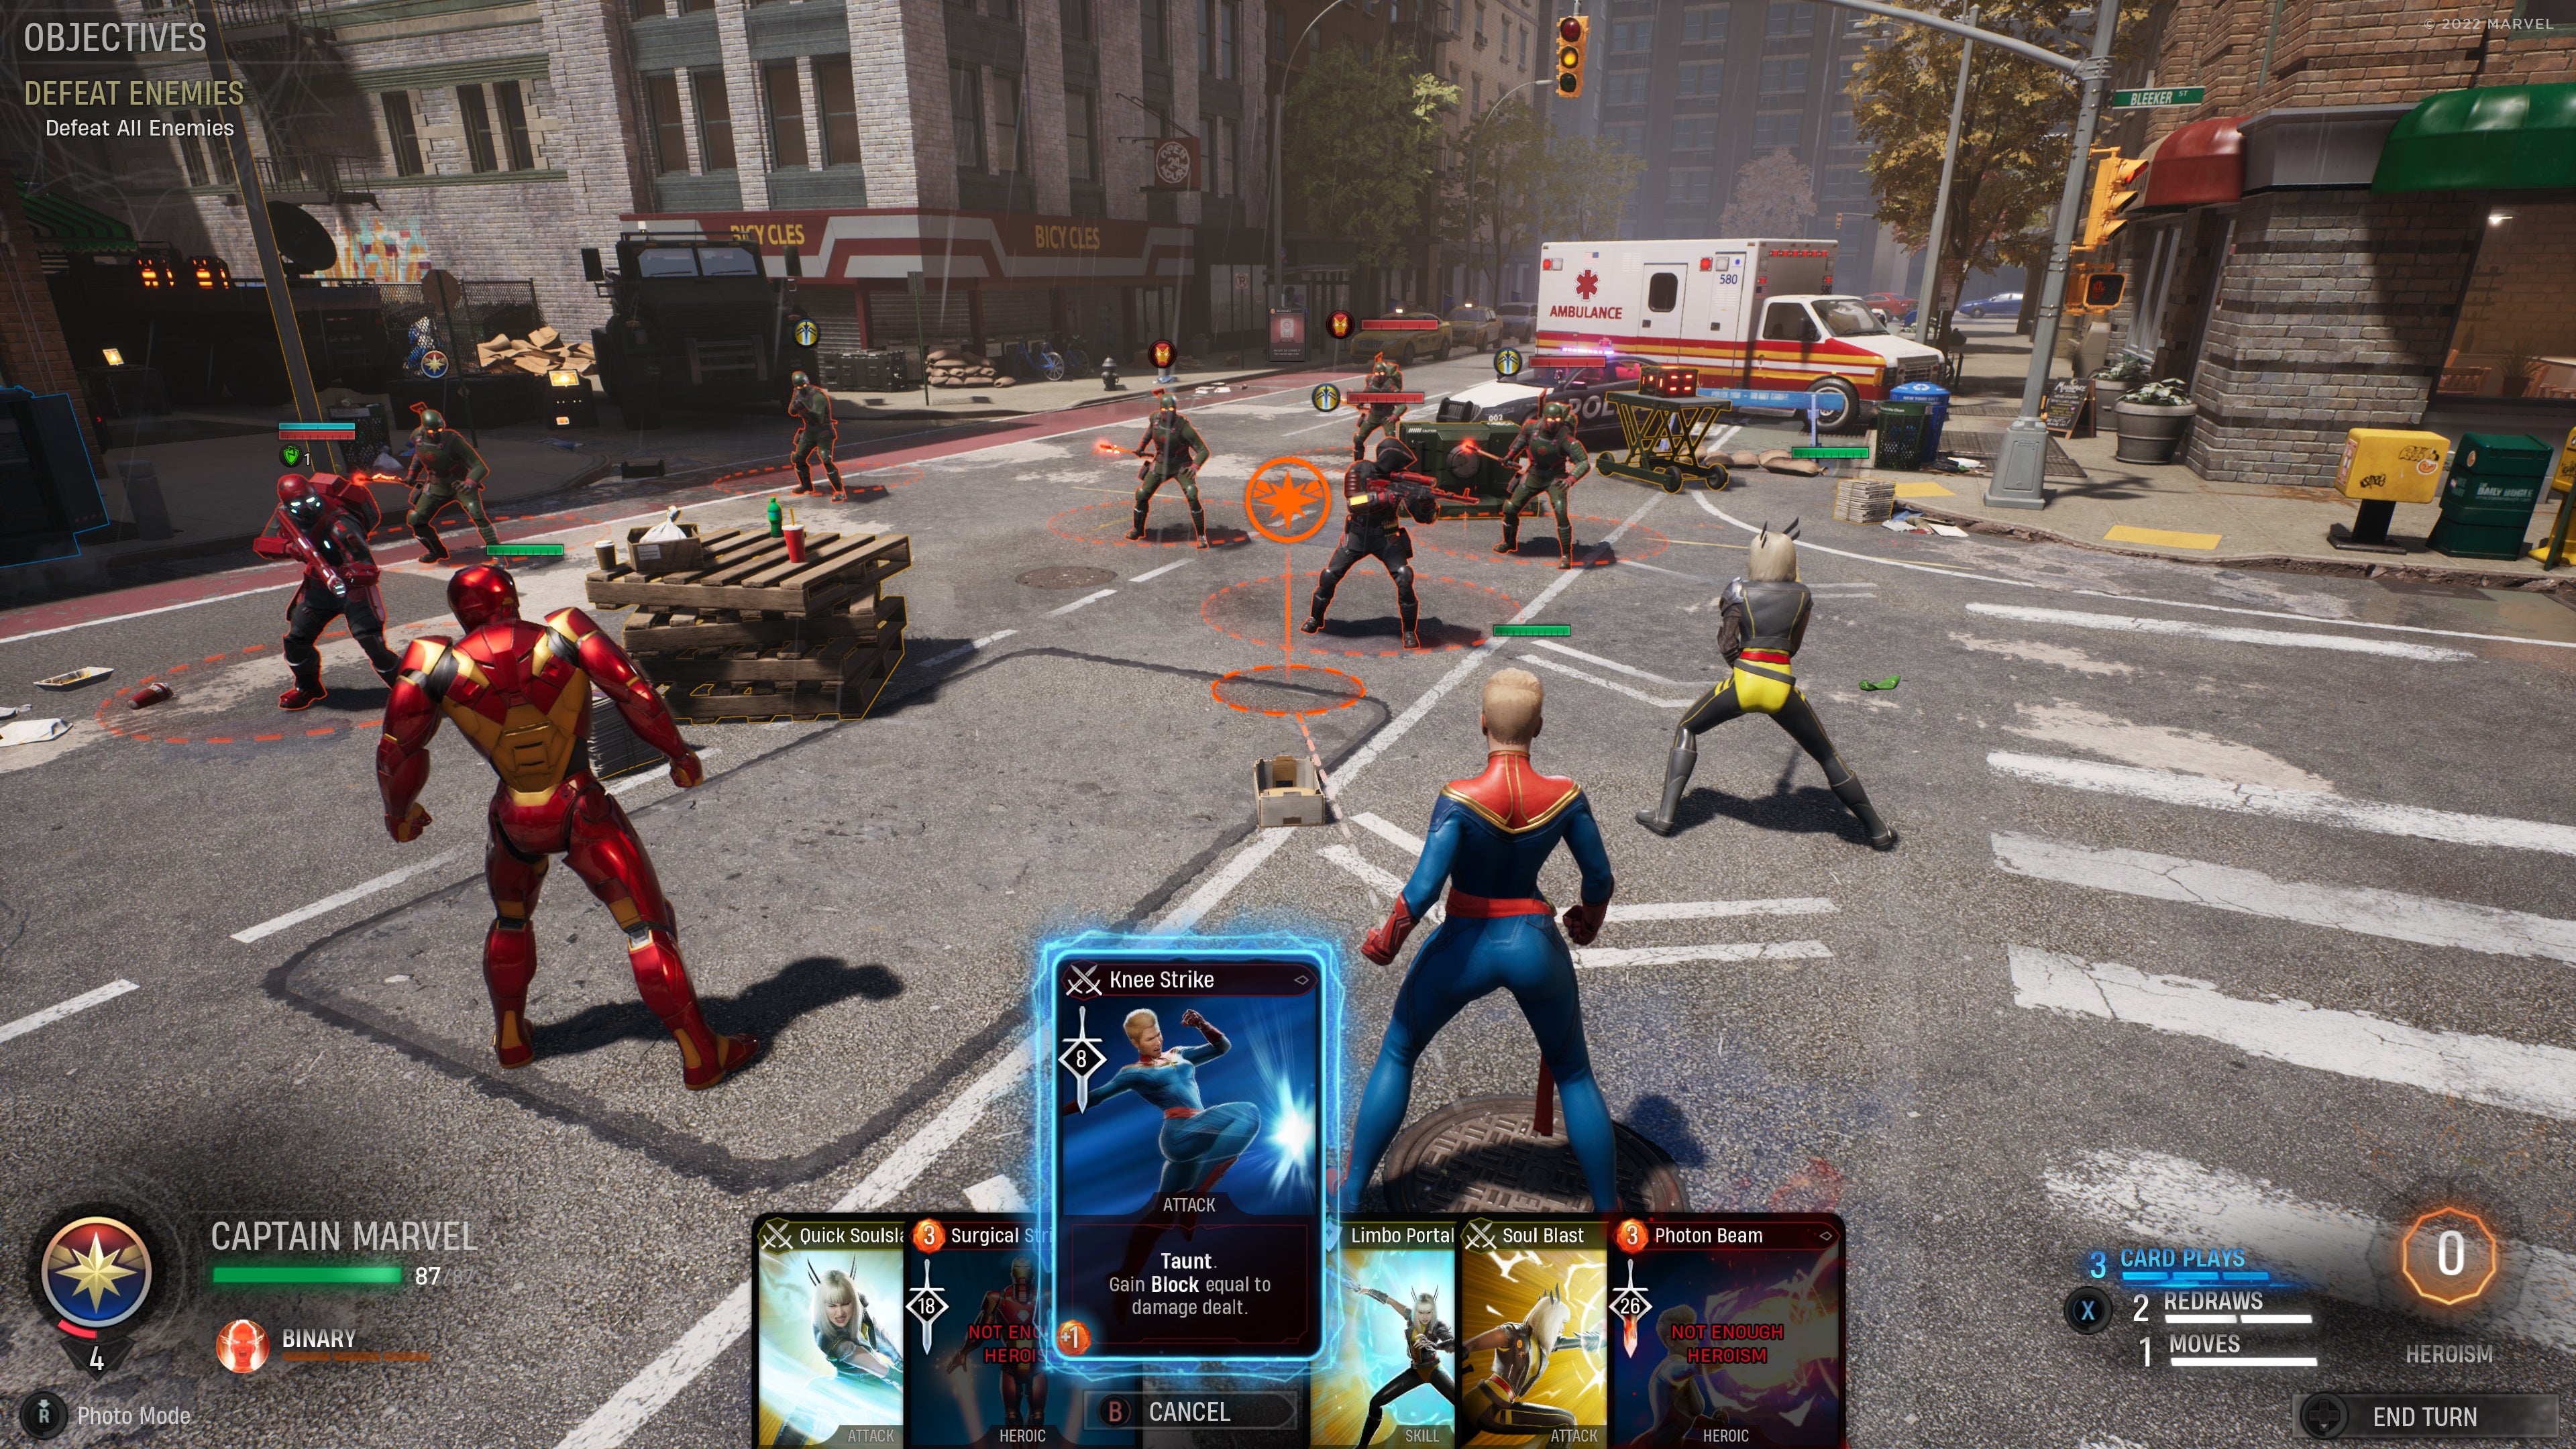 Superheroes Iron Man, Captain Marvel and Magik face off against Hydra soldiers on the crossroads of an urban, city street.